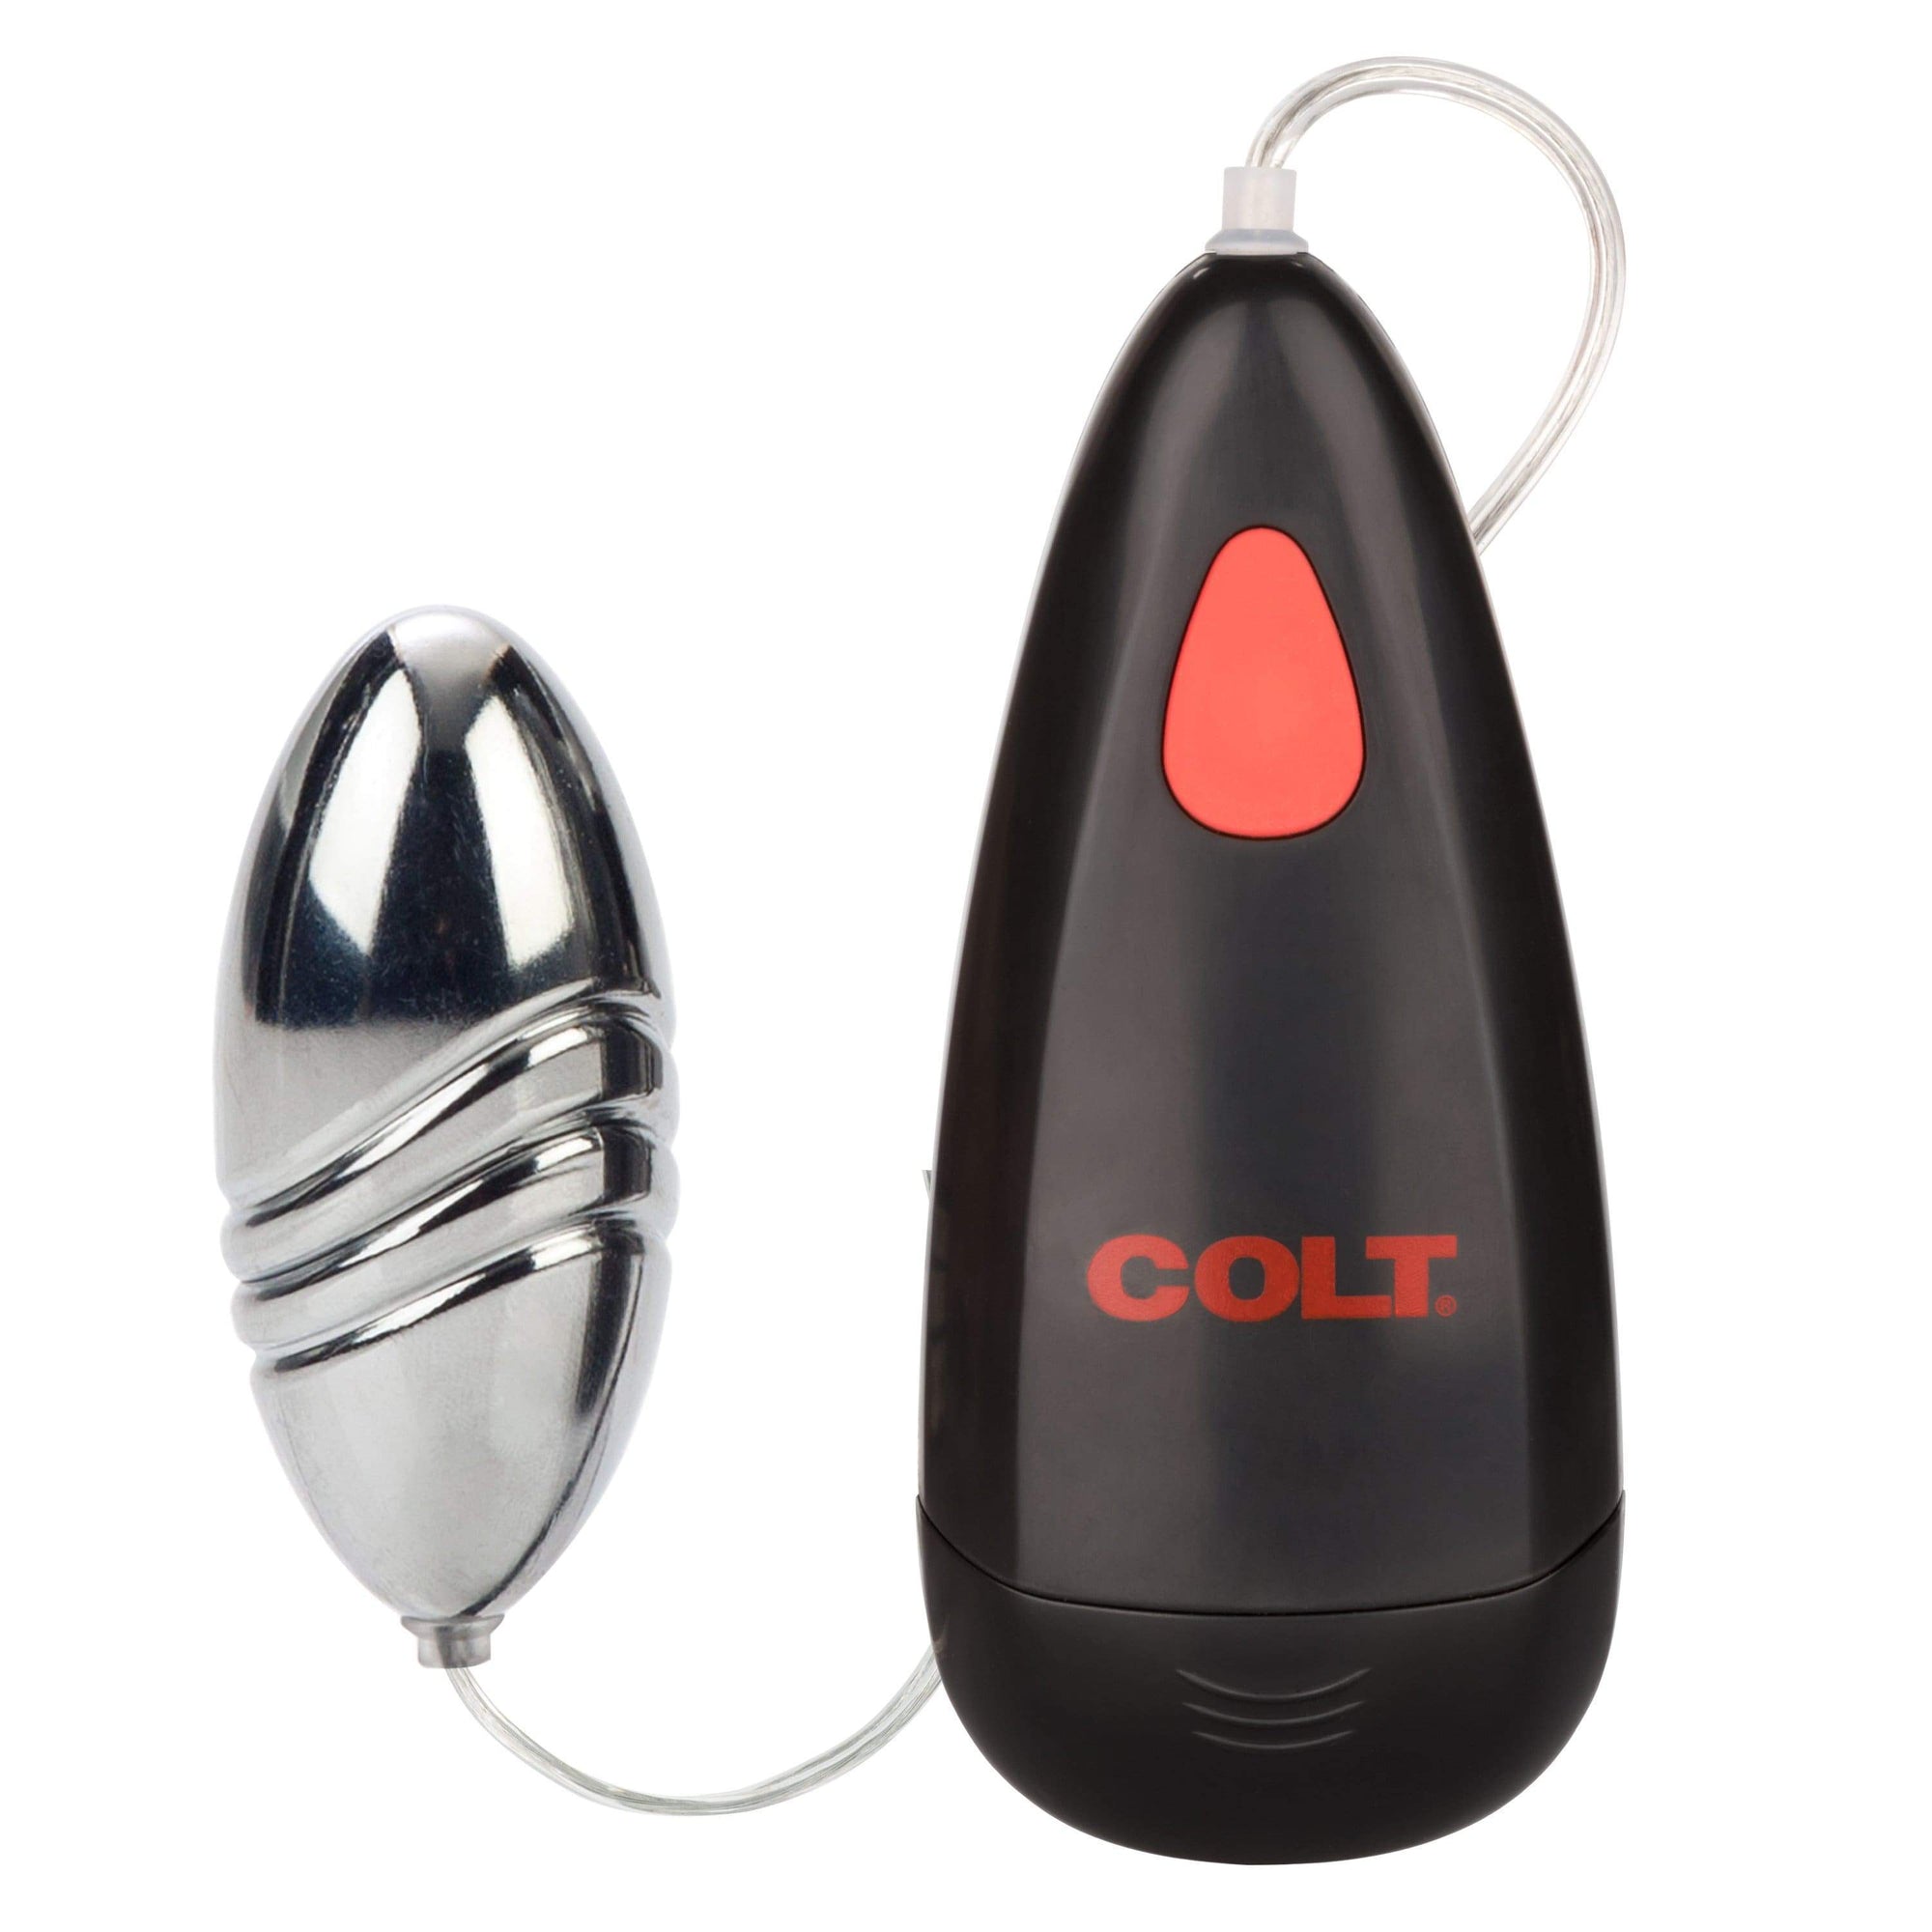 California Exotics - COLT Waterproof Silver Turbo Bullet Vibrator with Remote (Silver) Wired Remote Control Egg (Vibration) Non Rechargeable Durio Asia